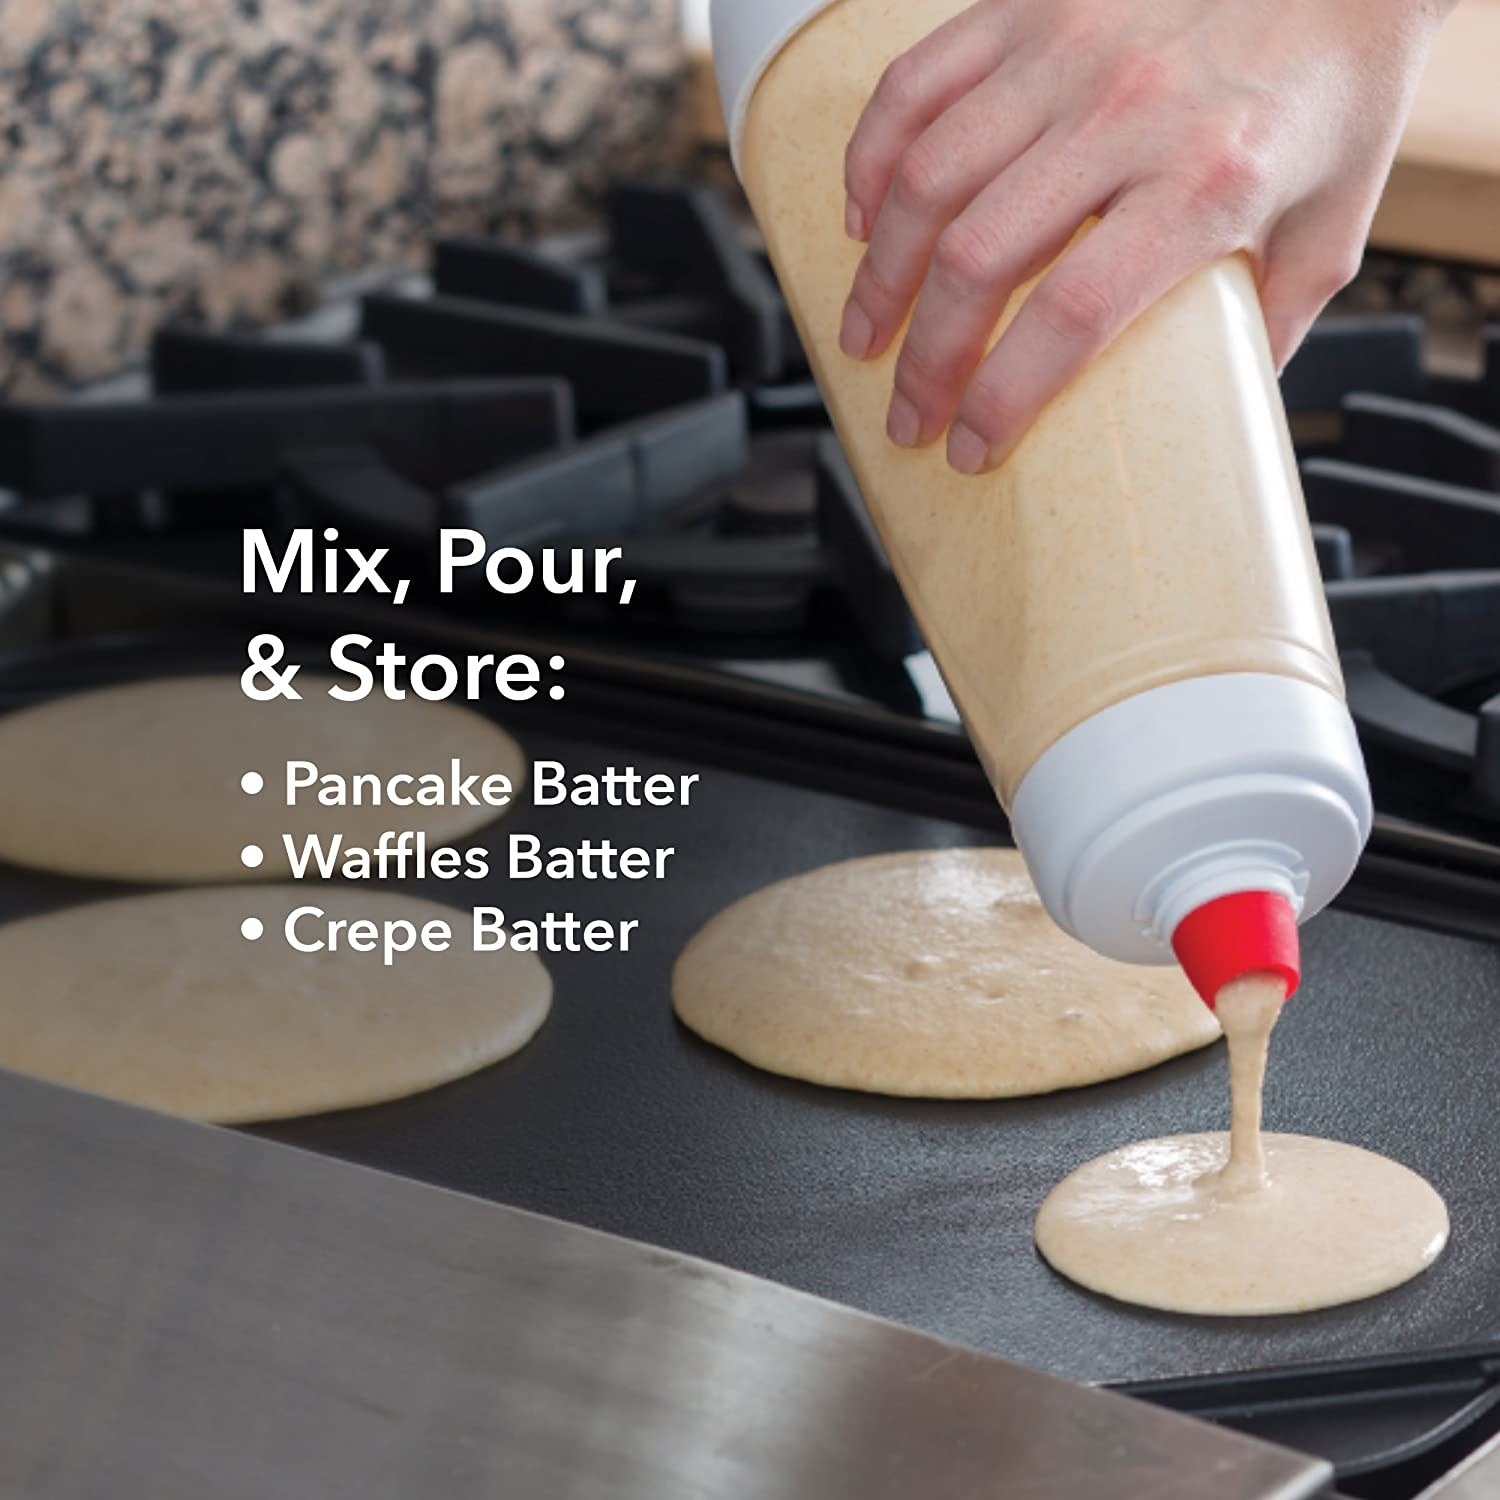 A clear plastic pancake mixer pouring batter onto a hot grill from its red silicone spout